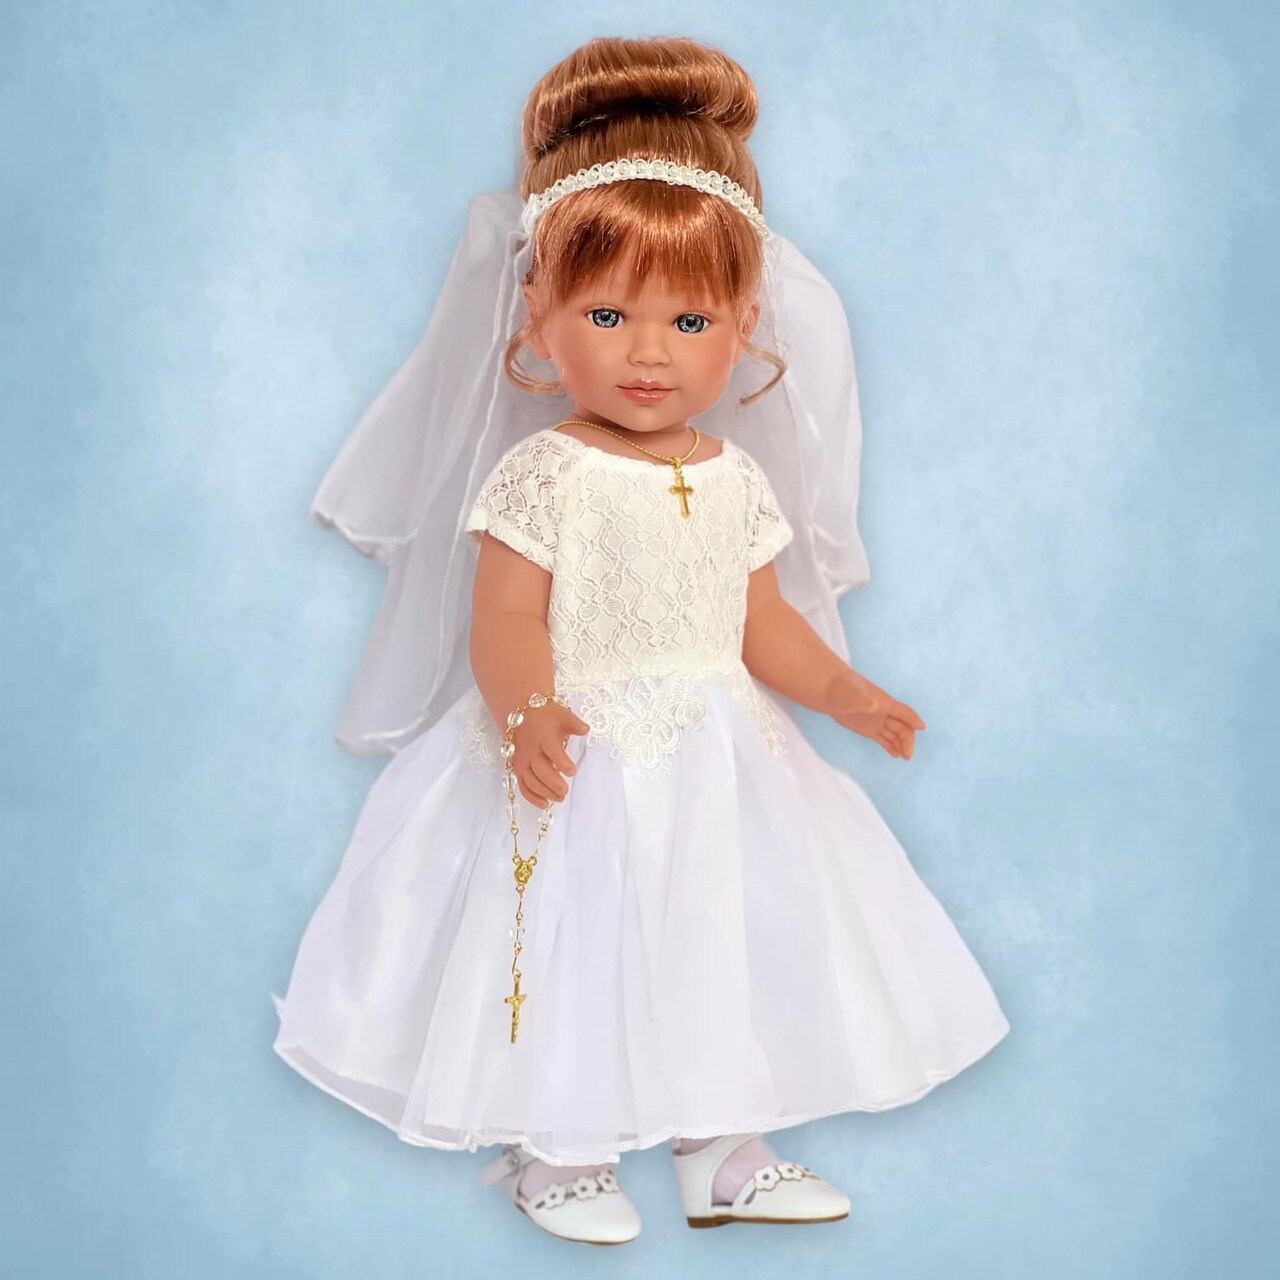 Allegra Communion Gown with Accessories For 18 Inch Dolls- Doll Clothes